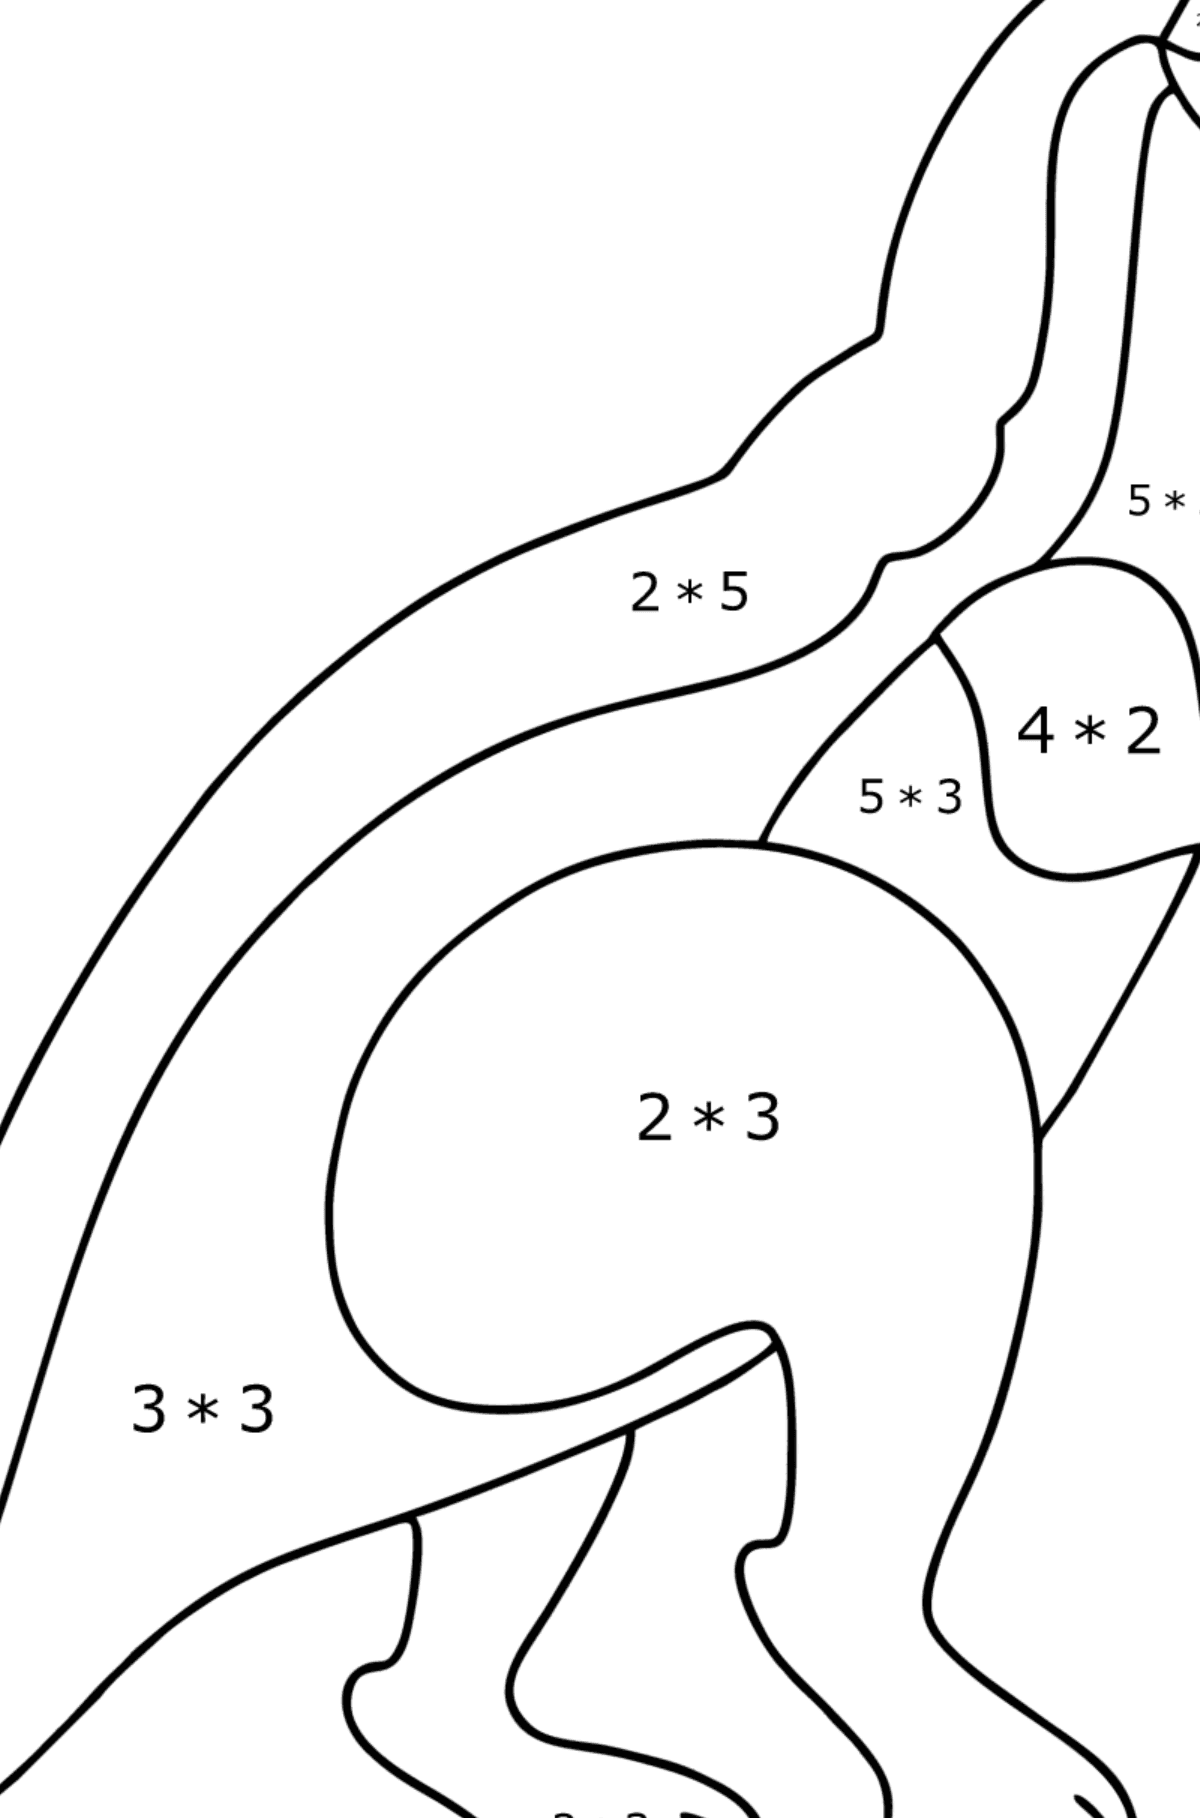 Agilisaurus coloring page - Math Coloring - Multiplication for Kids